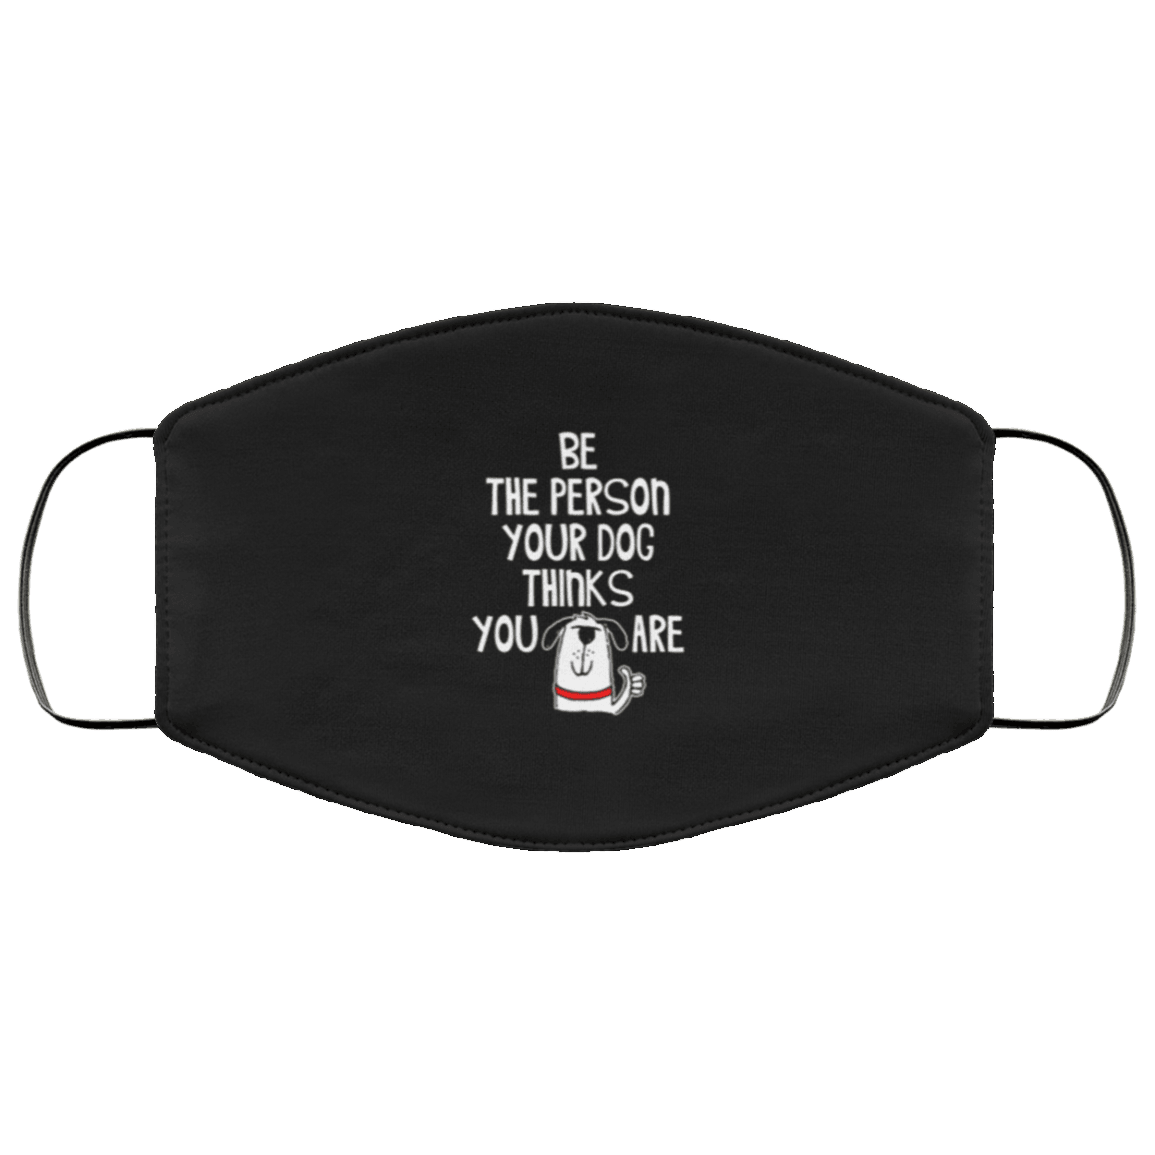 Designs by MyUtopia Shout Out:Be The Person Your Dog Thinks You Are Pet Humor Adult Fabric Face Mask with Elastic Ear Loops,3 Layer Fabric Face Mask / Black / Adult,Fabric Face Mask